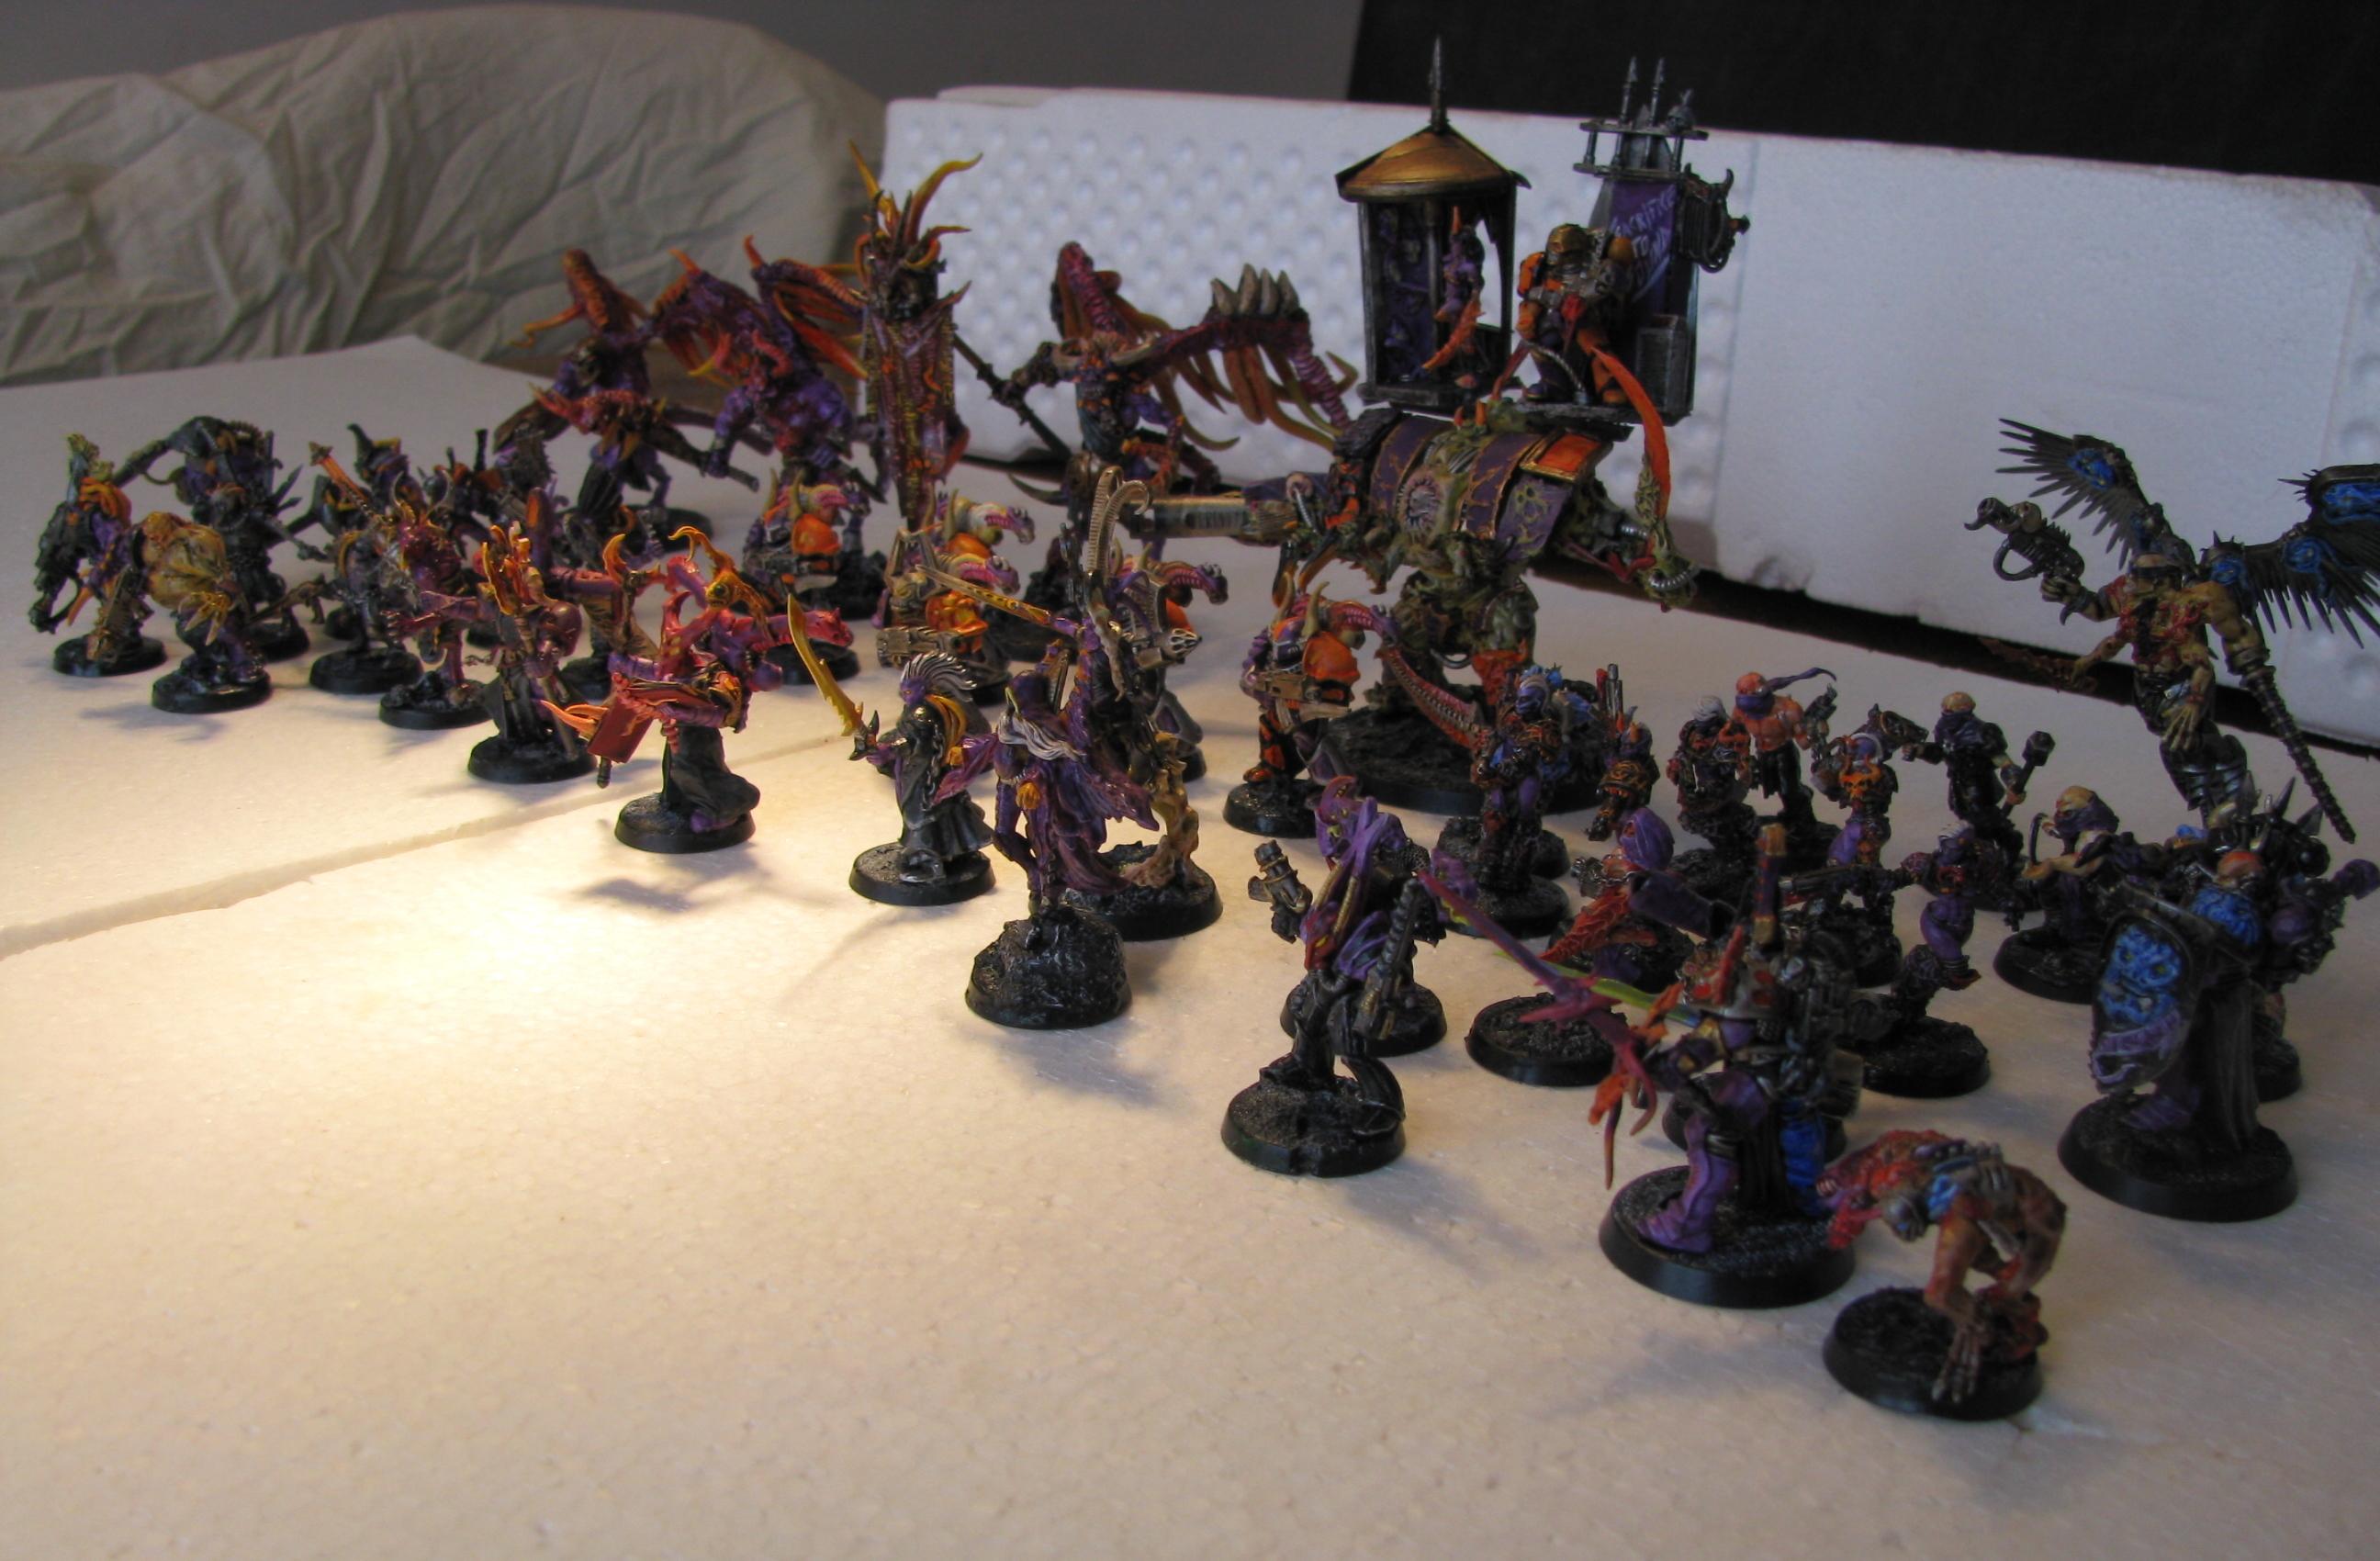 Army, Chaos, Chaos Space Marines, Conversion, Daemons